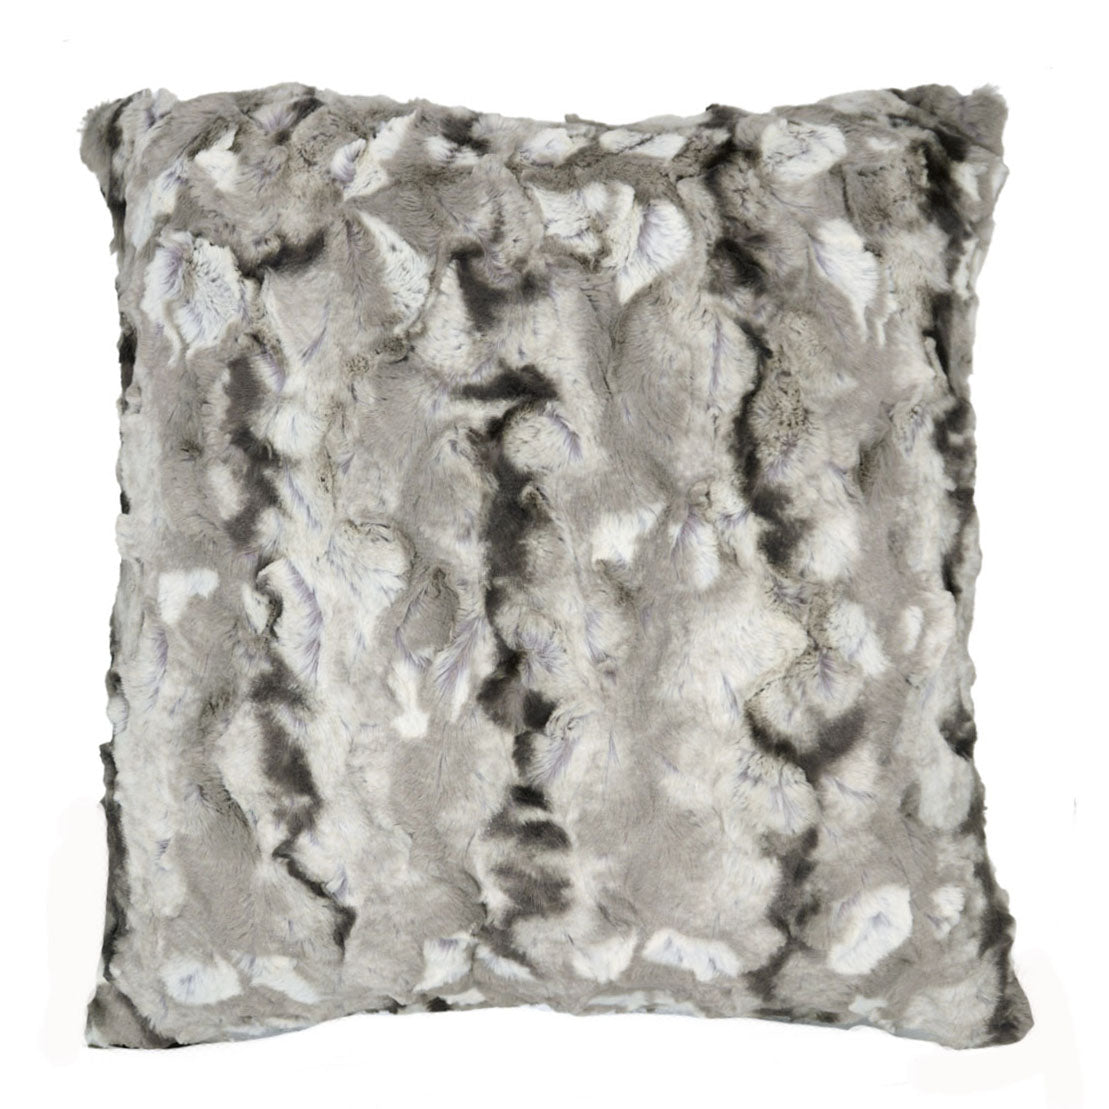 Pillow Sham | White Water Faux Fur | Handmade in the USA by Pandemonium Seattle